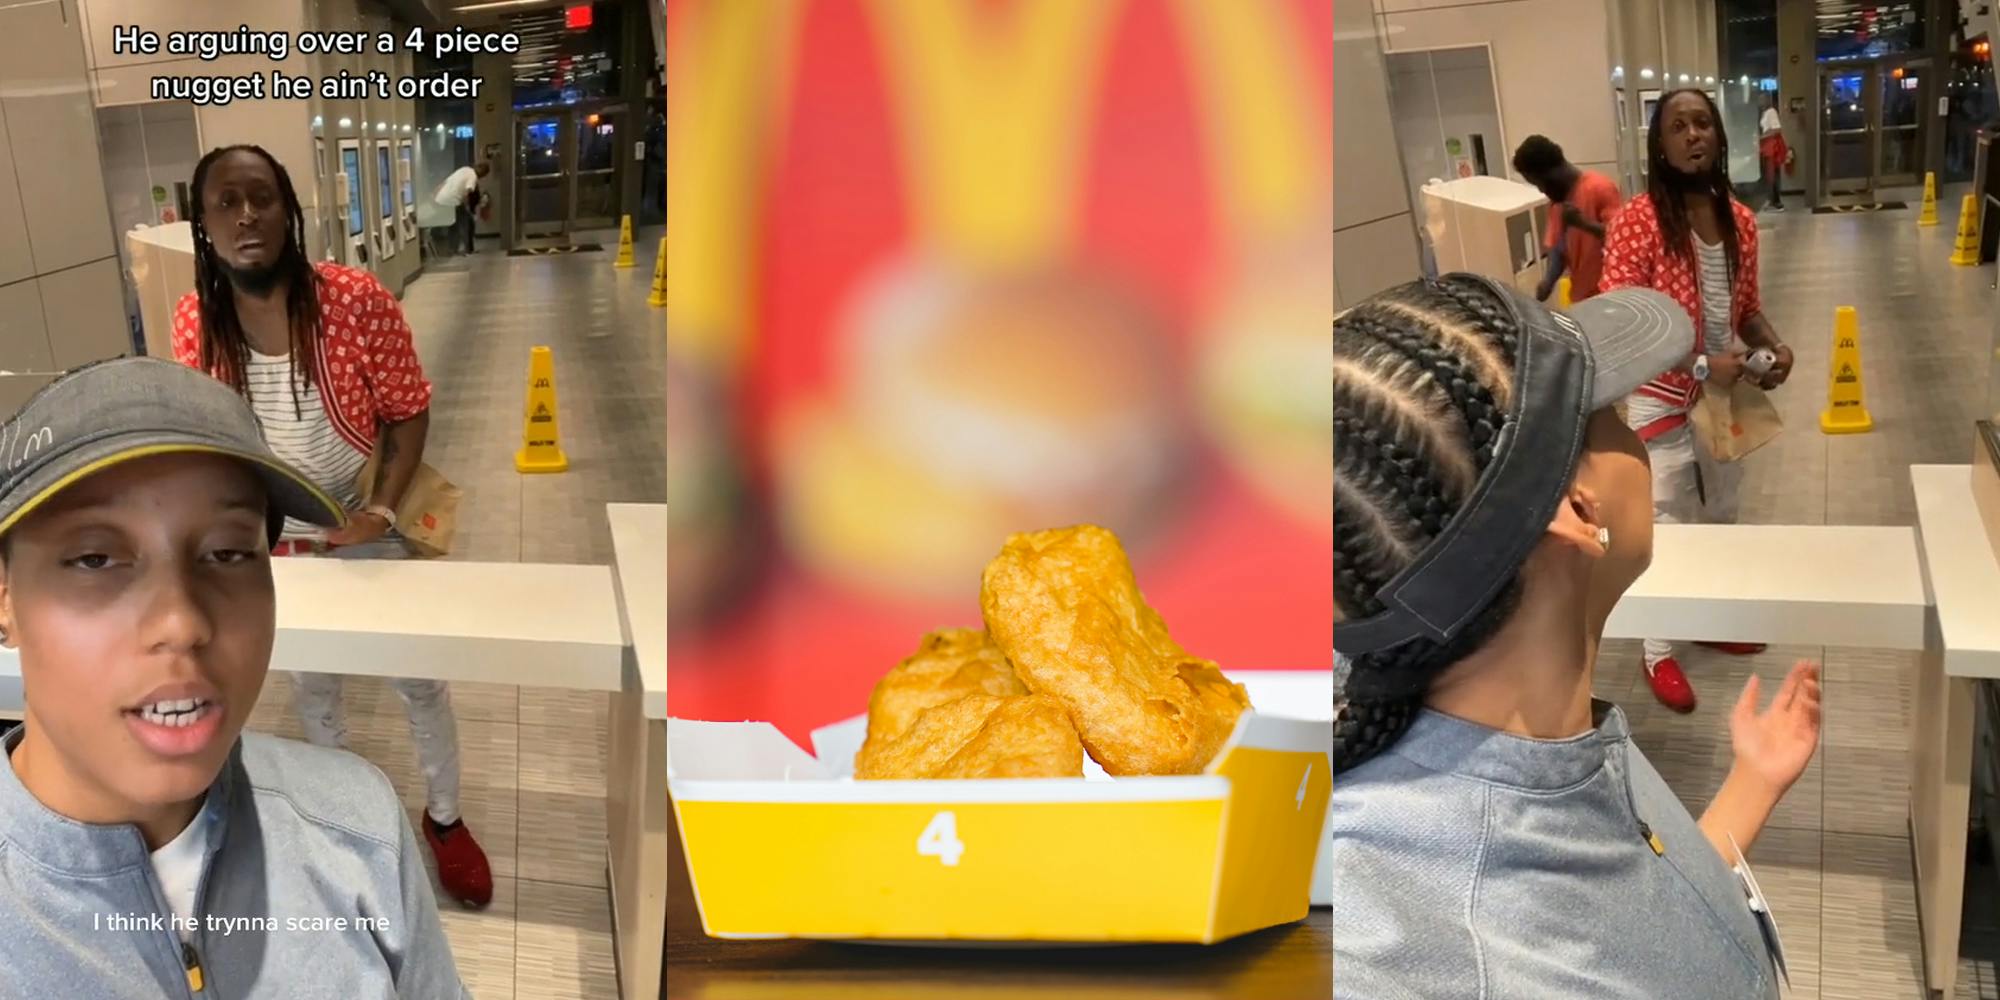 McDonald's employee and customer with caption "he arguing over a 4 piece nugget he ain't order" "I think he trynna scare me" (l) McDonald's 4 piece nuggets in front of blurry background (c) McDonald's employee speaking to customer (r)